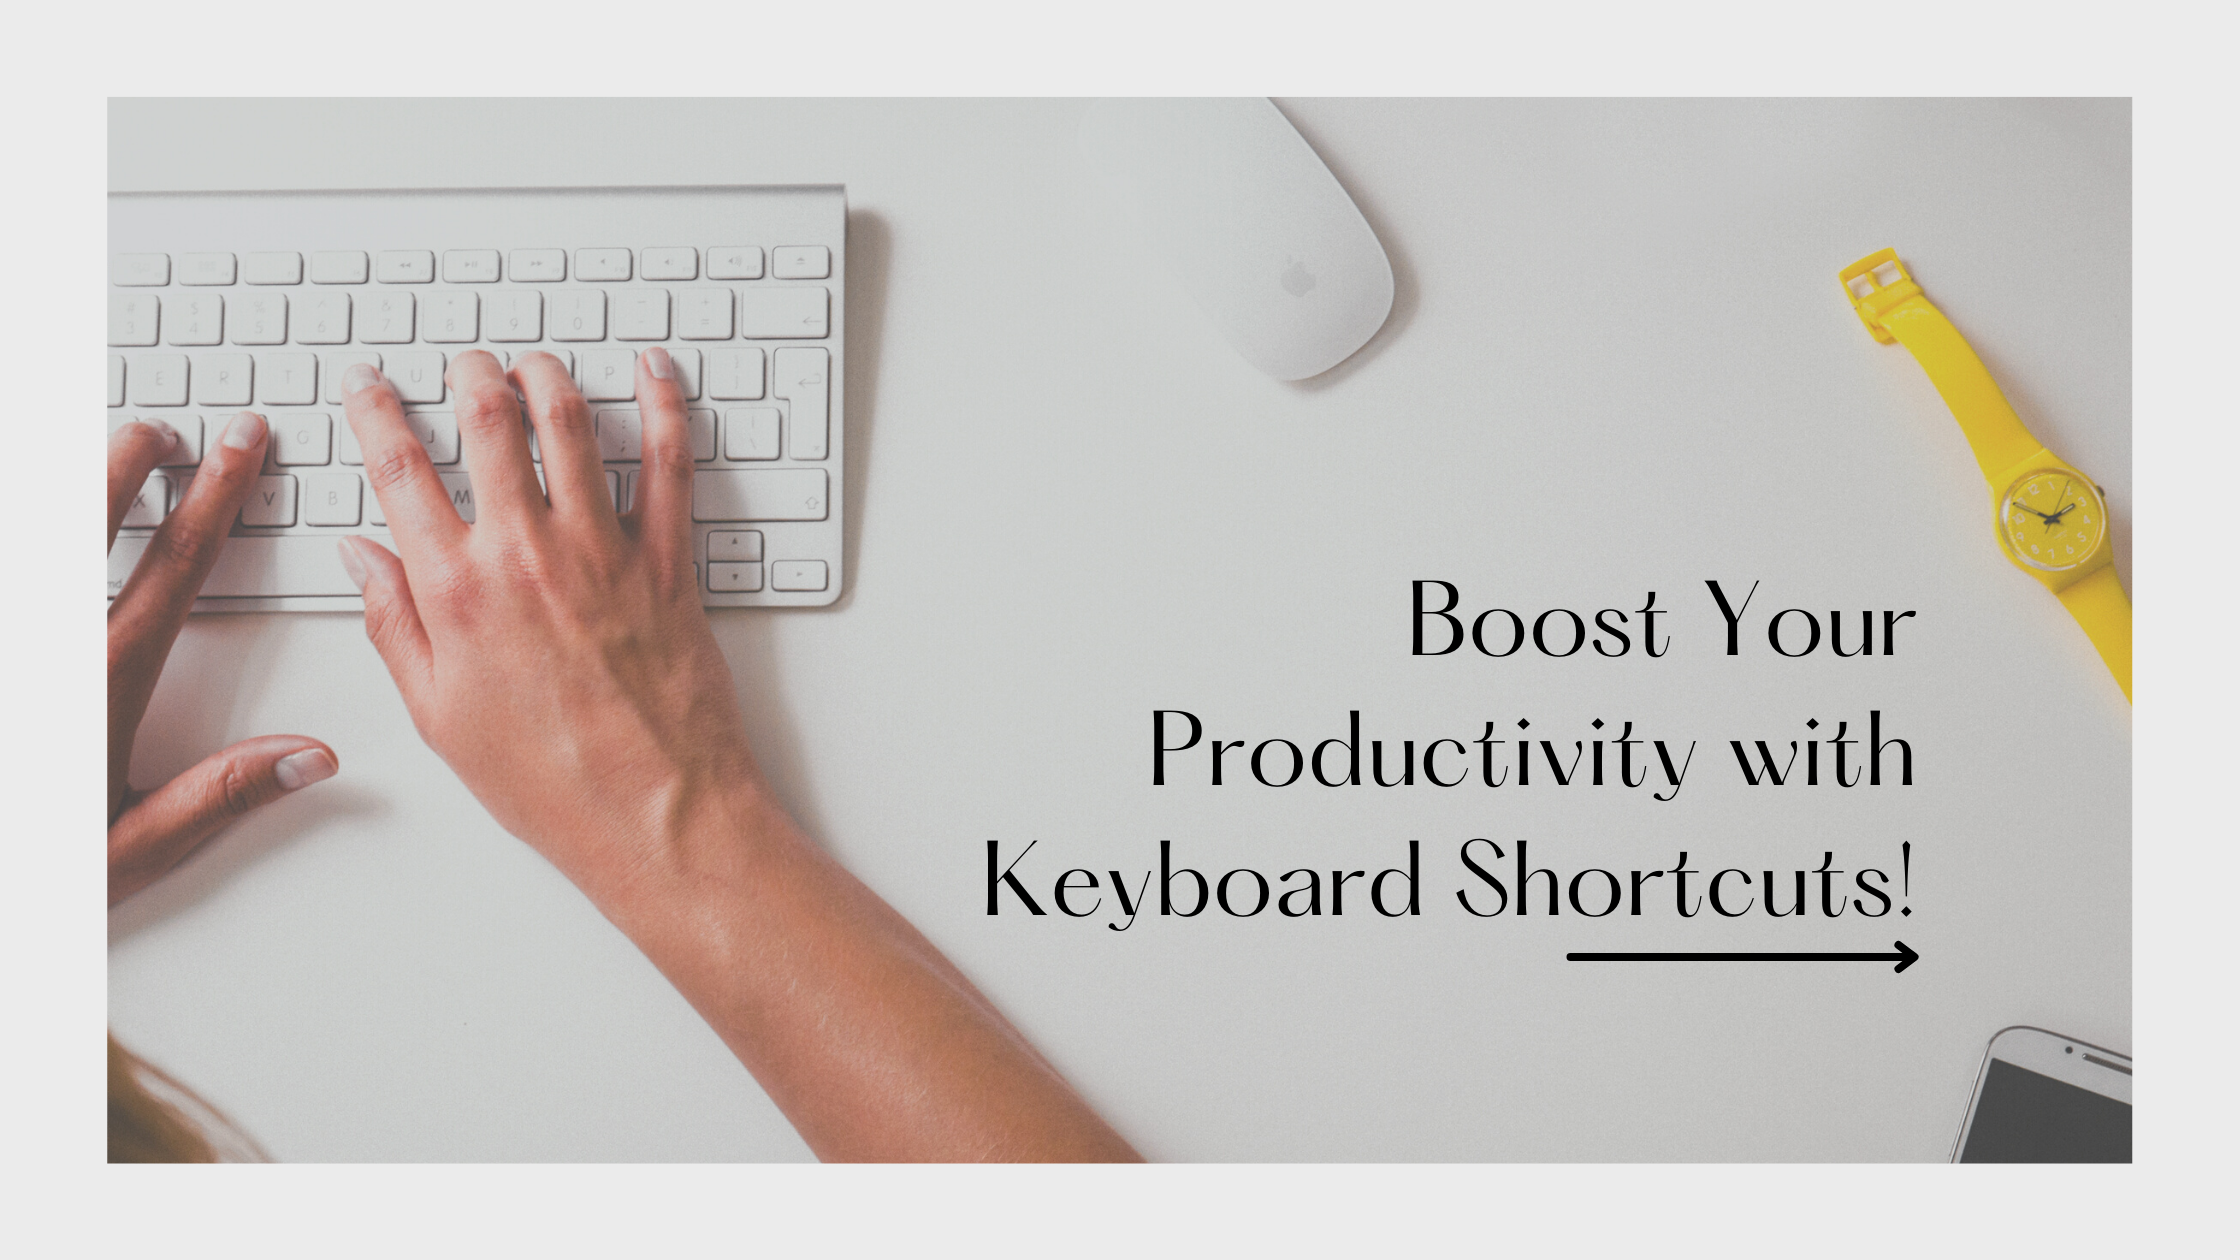 Boost Your Productivity with Keyboard Shortcuts!